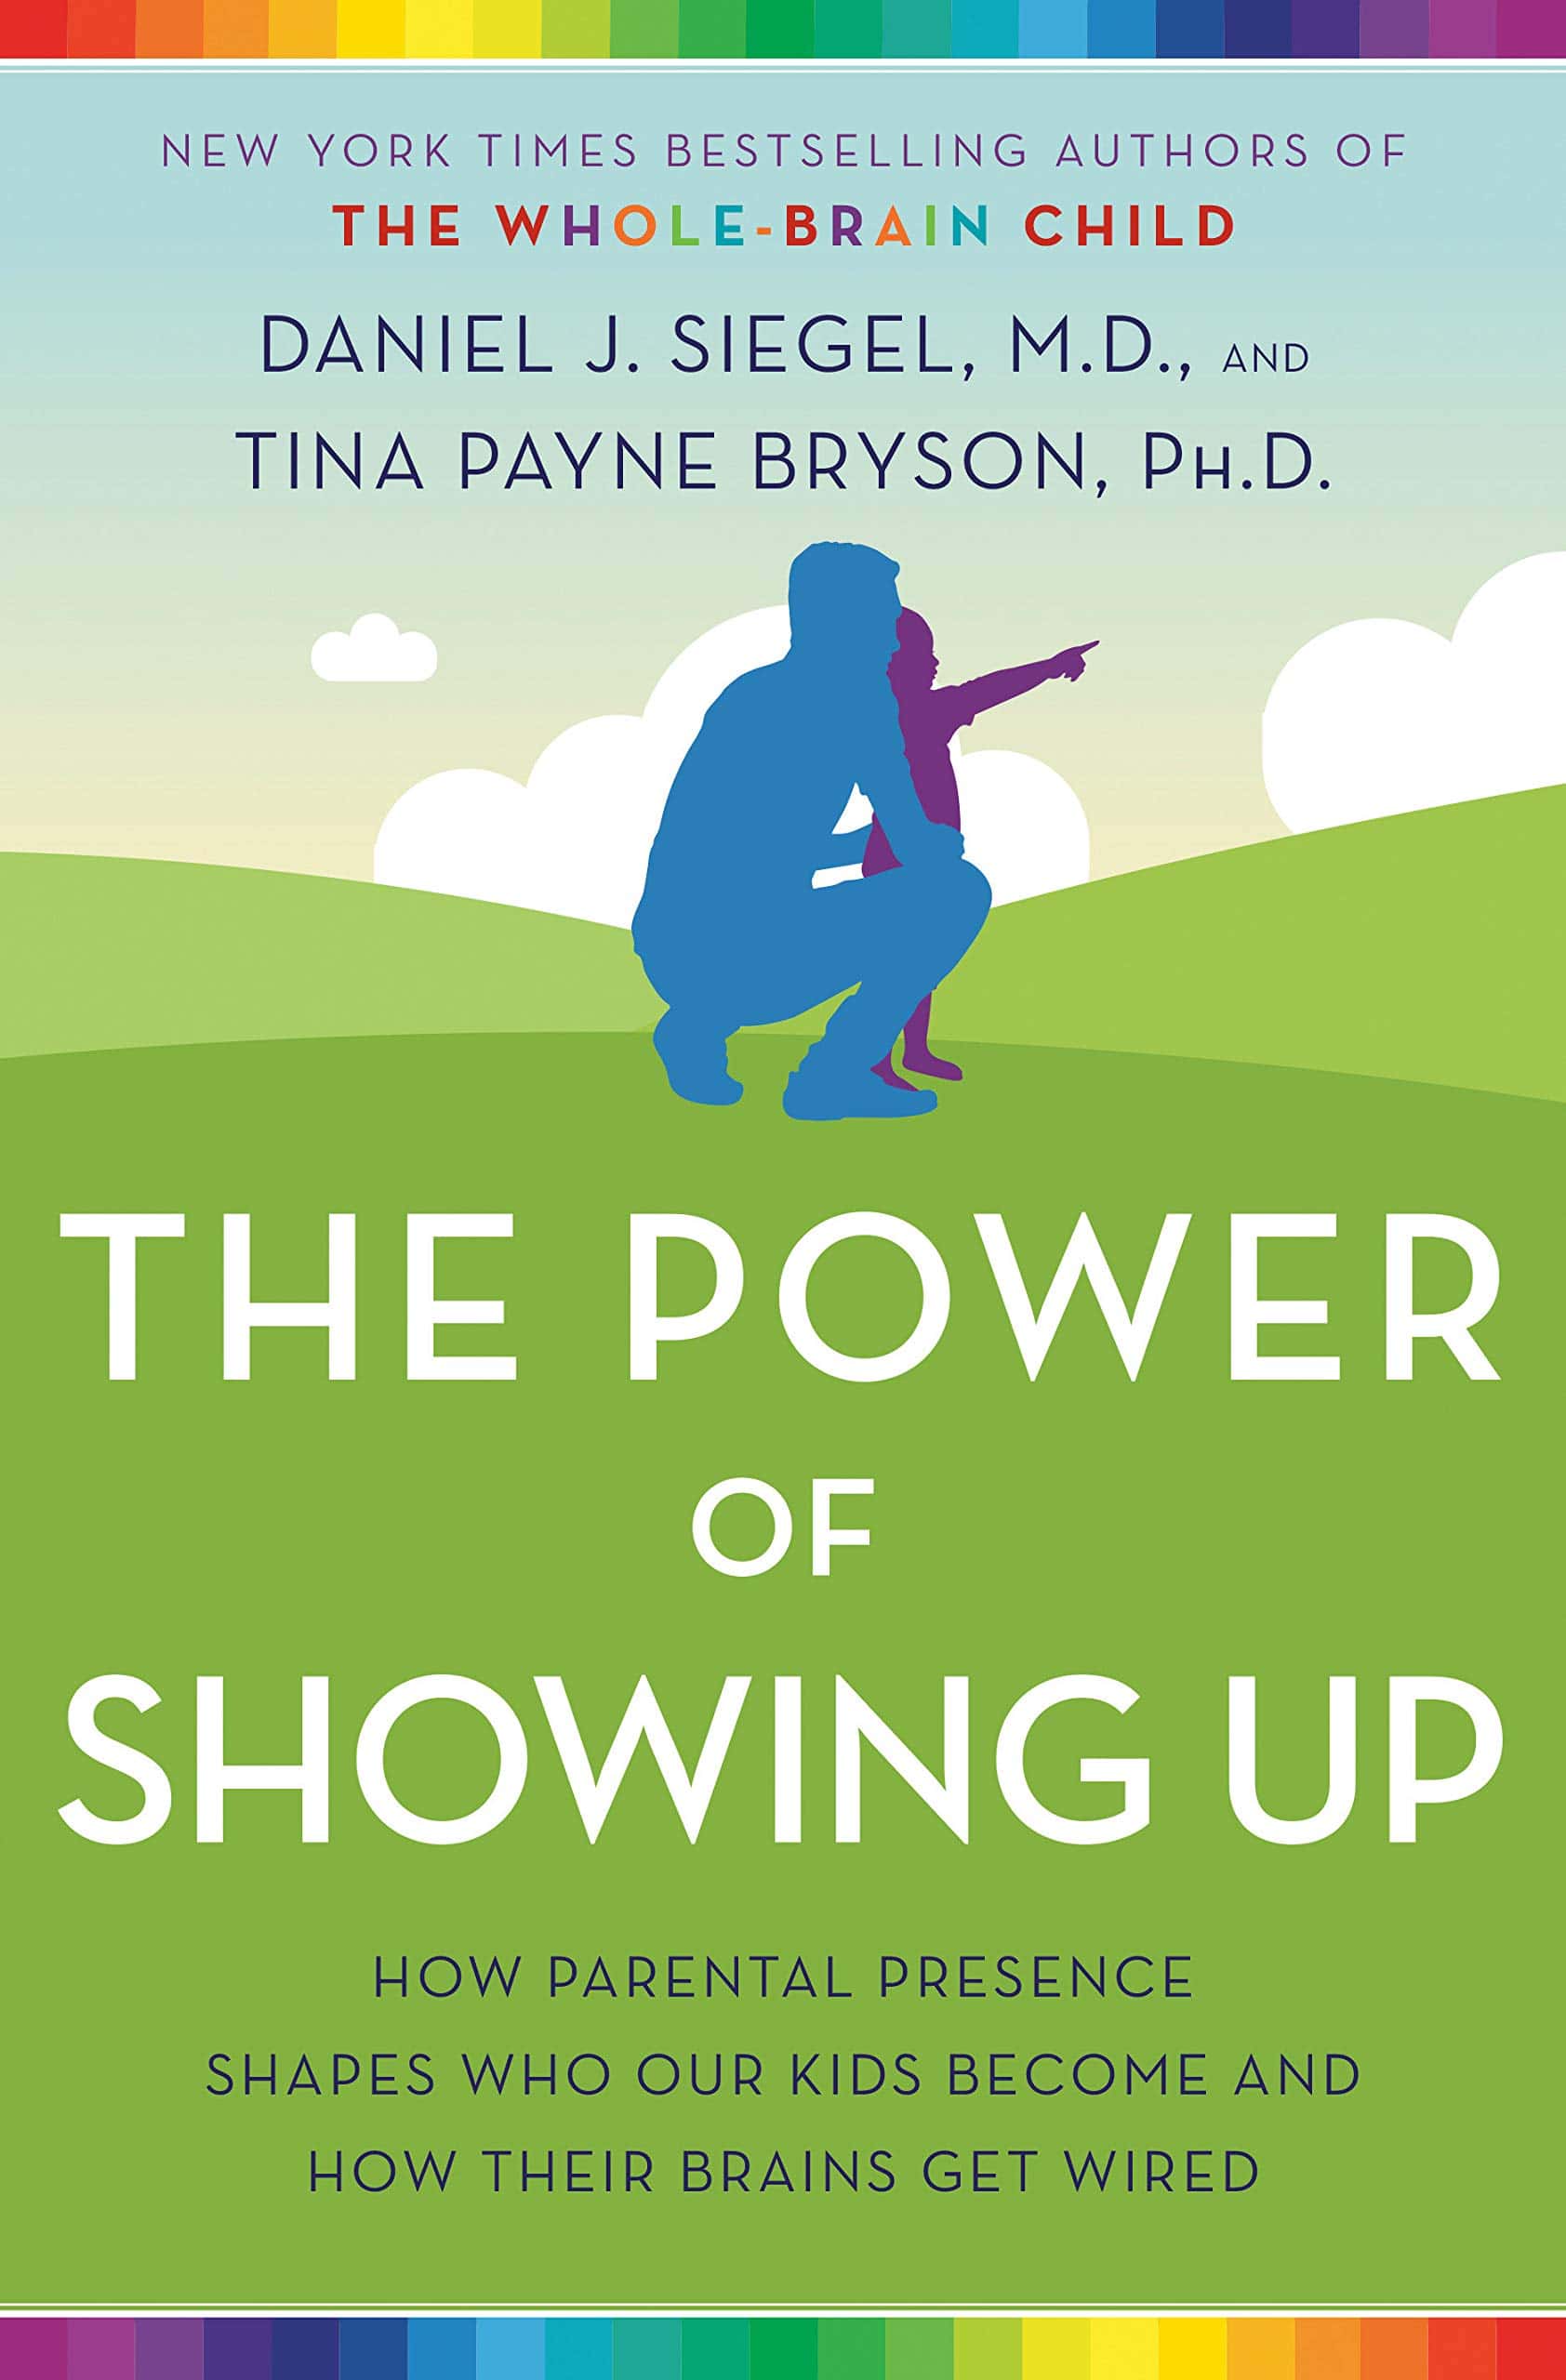 "The Power of Showing Up" by Daniel J. Siegel, M.D., and Tina Payne Bryson, Ph.D.